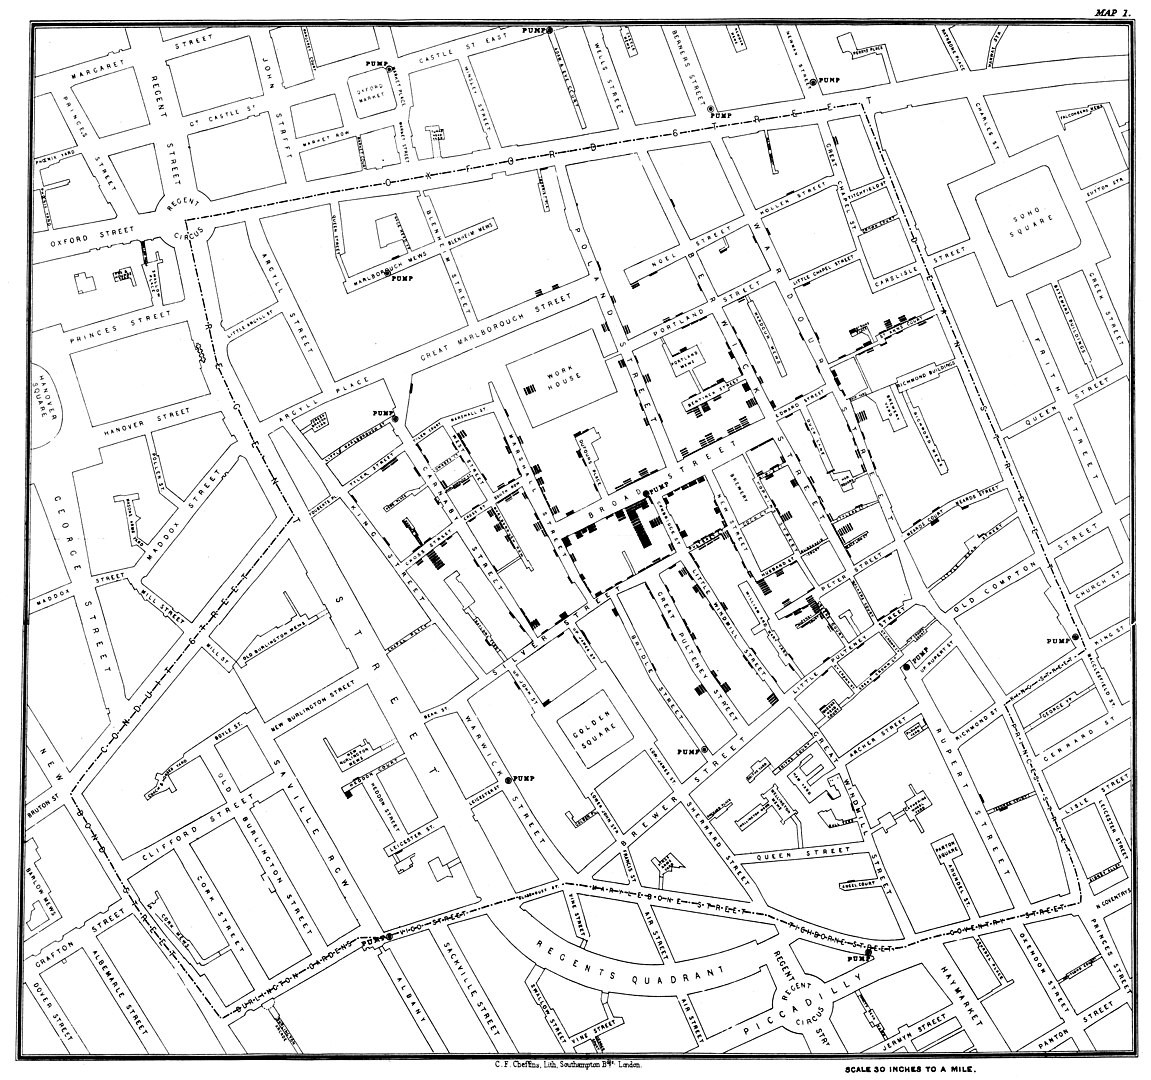 Map by 19th C epidemiologist John Snow, showing clusters of cholera cases in London.